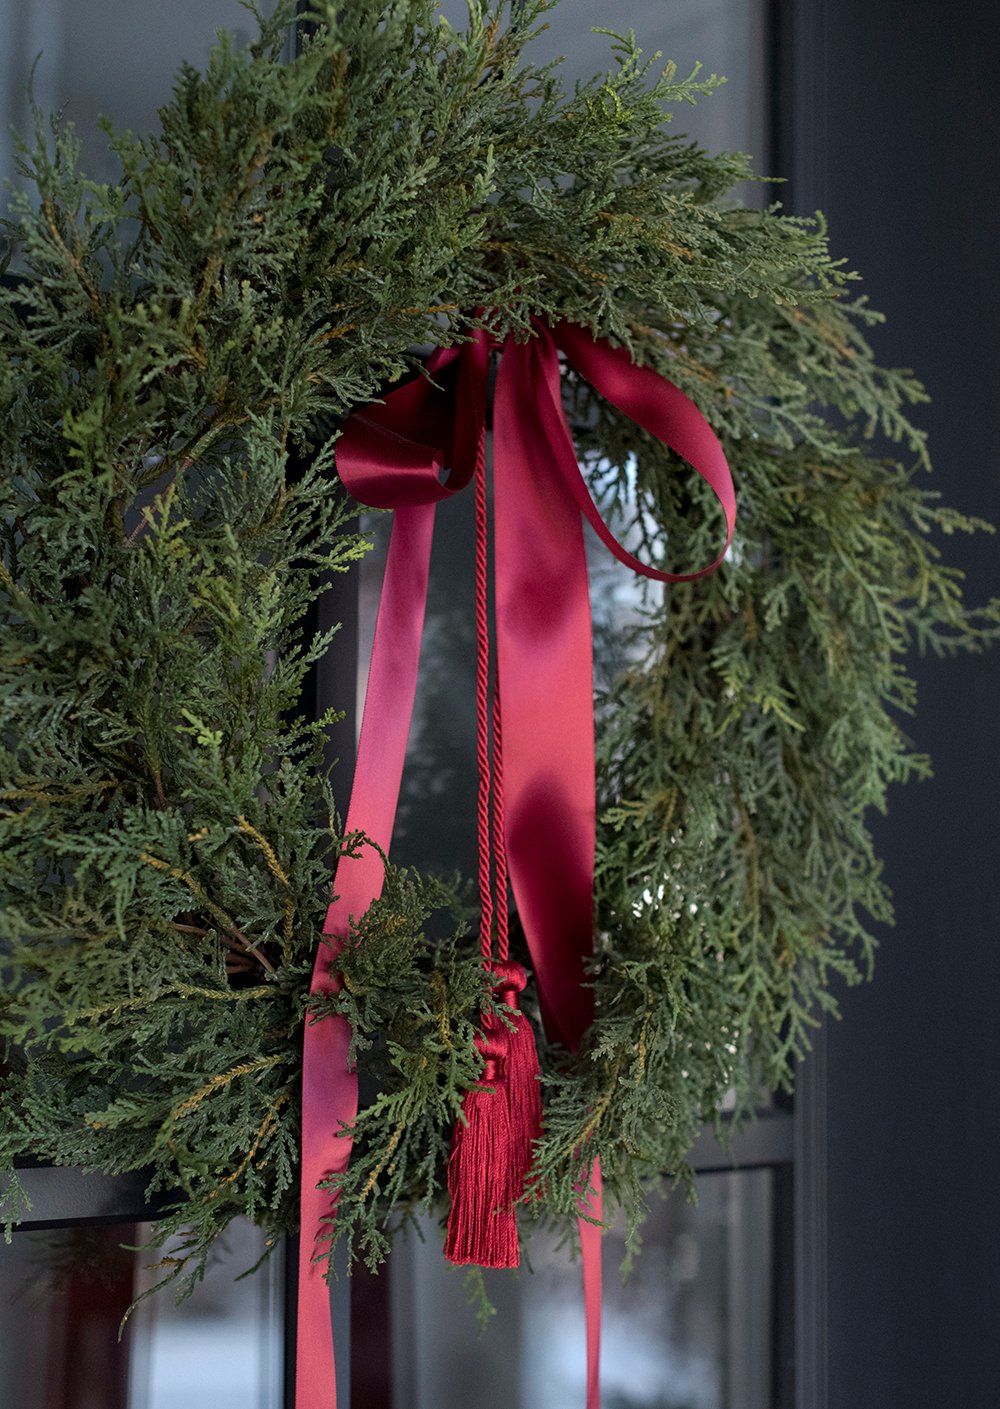 The Best Faux Trees, Garland, & Holiday Wreaths - roomfortuesday.com